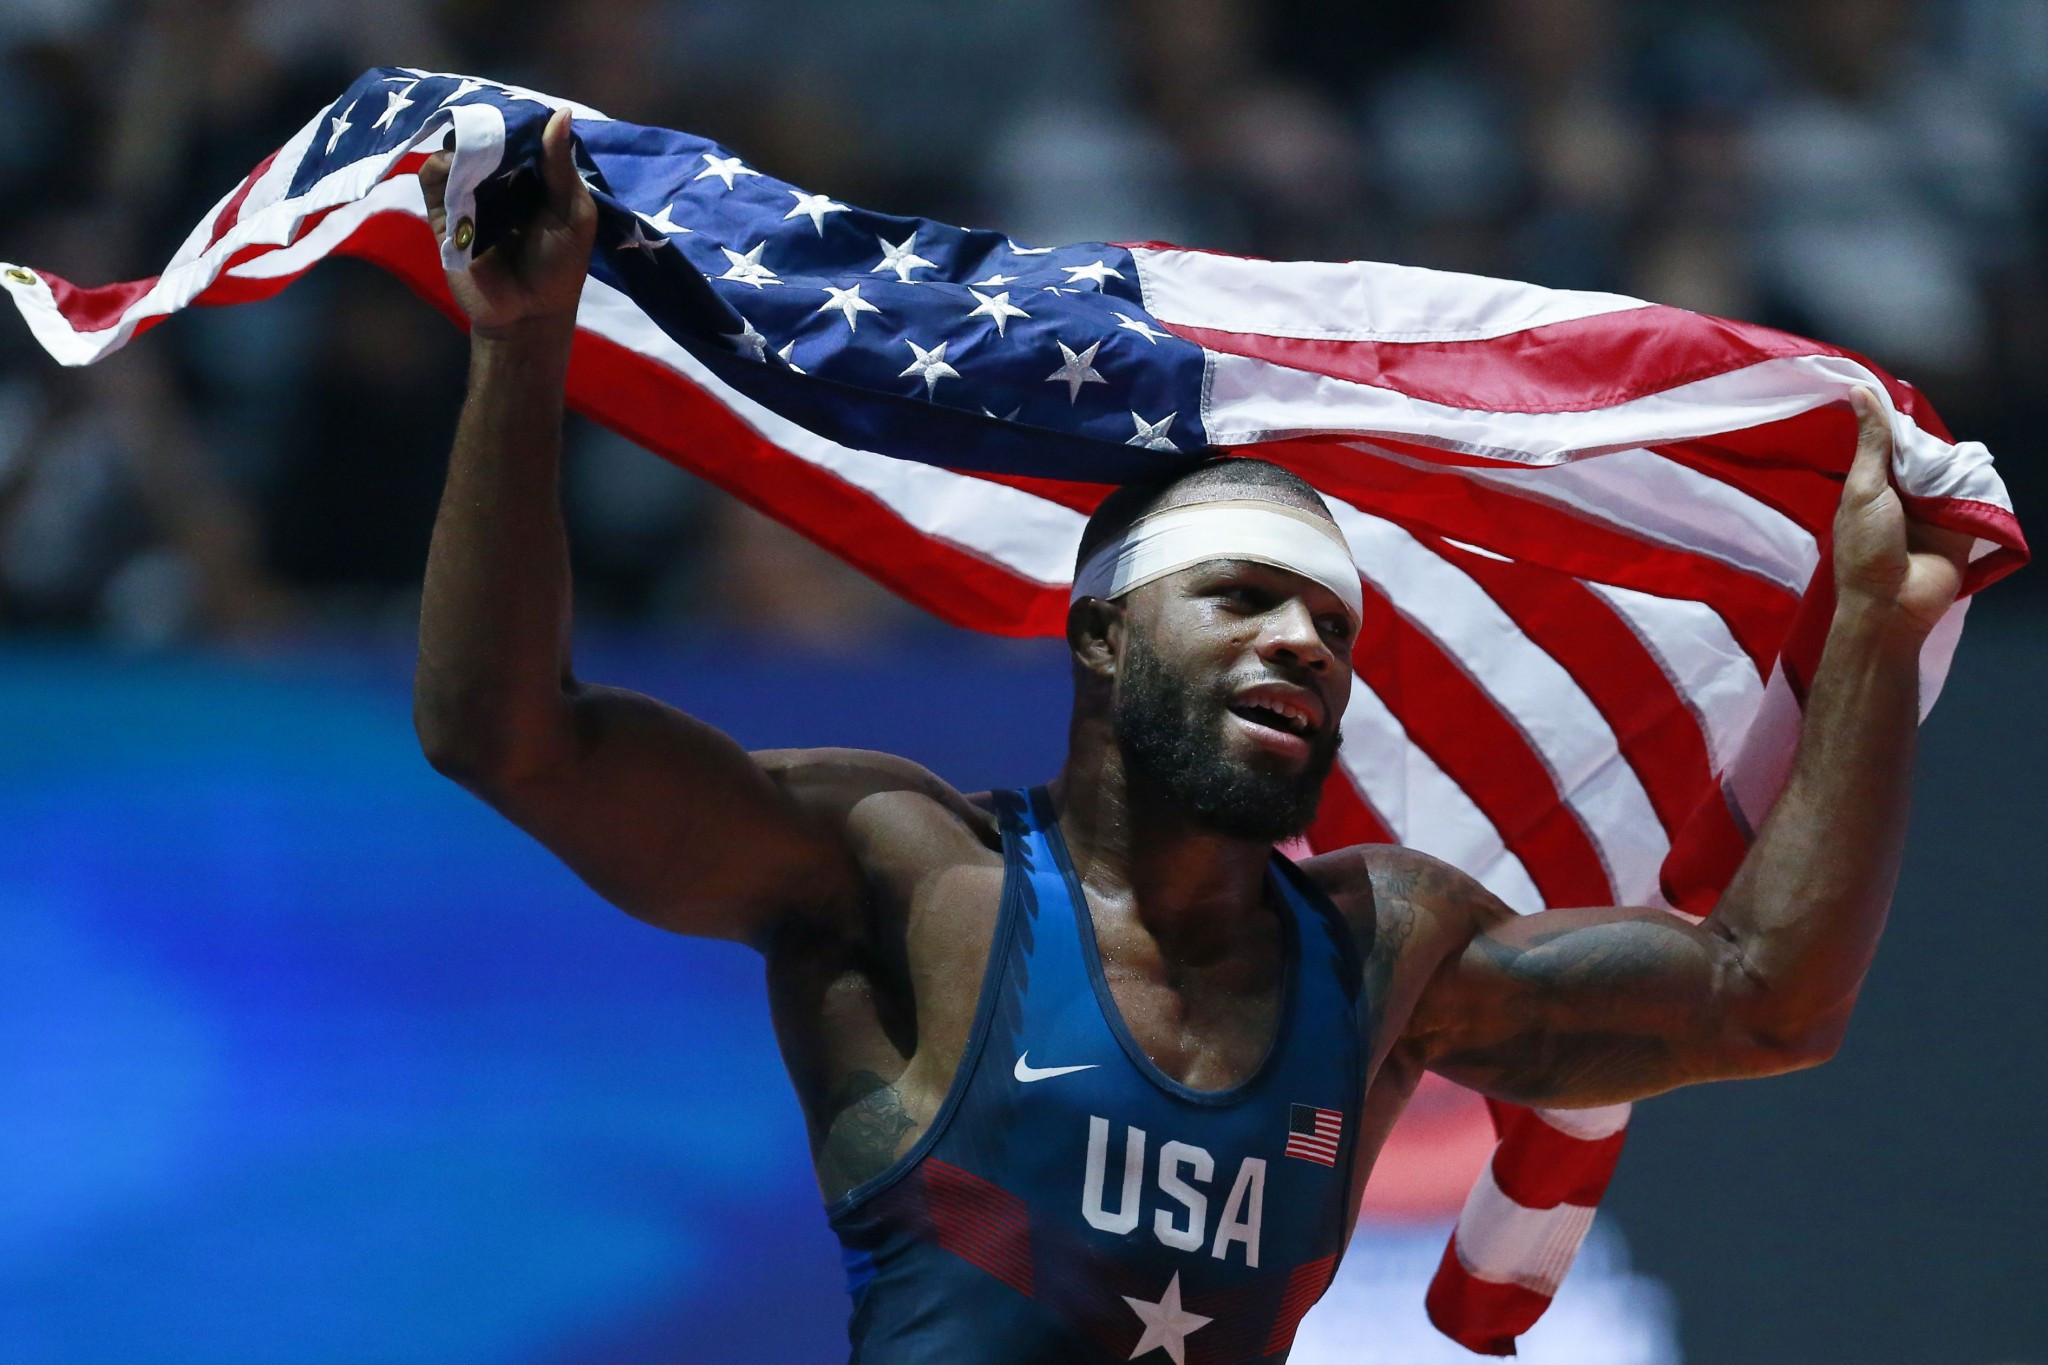 Jordan Burroughs has been named chair of the UWW Athletes Commission ©Getty Images